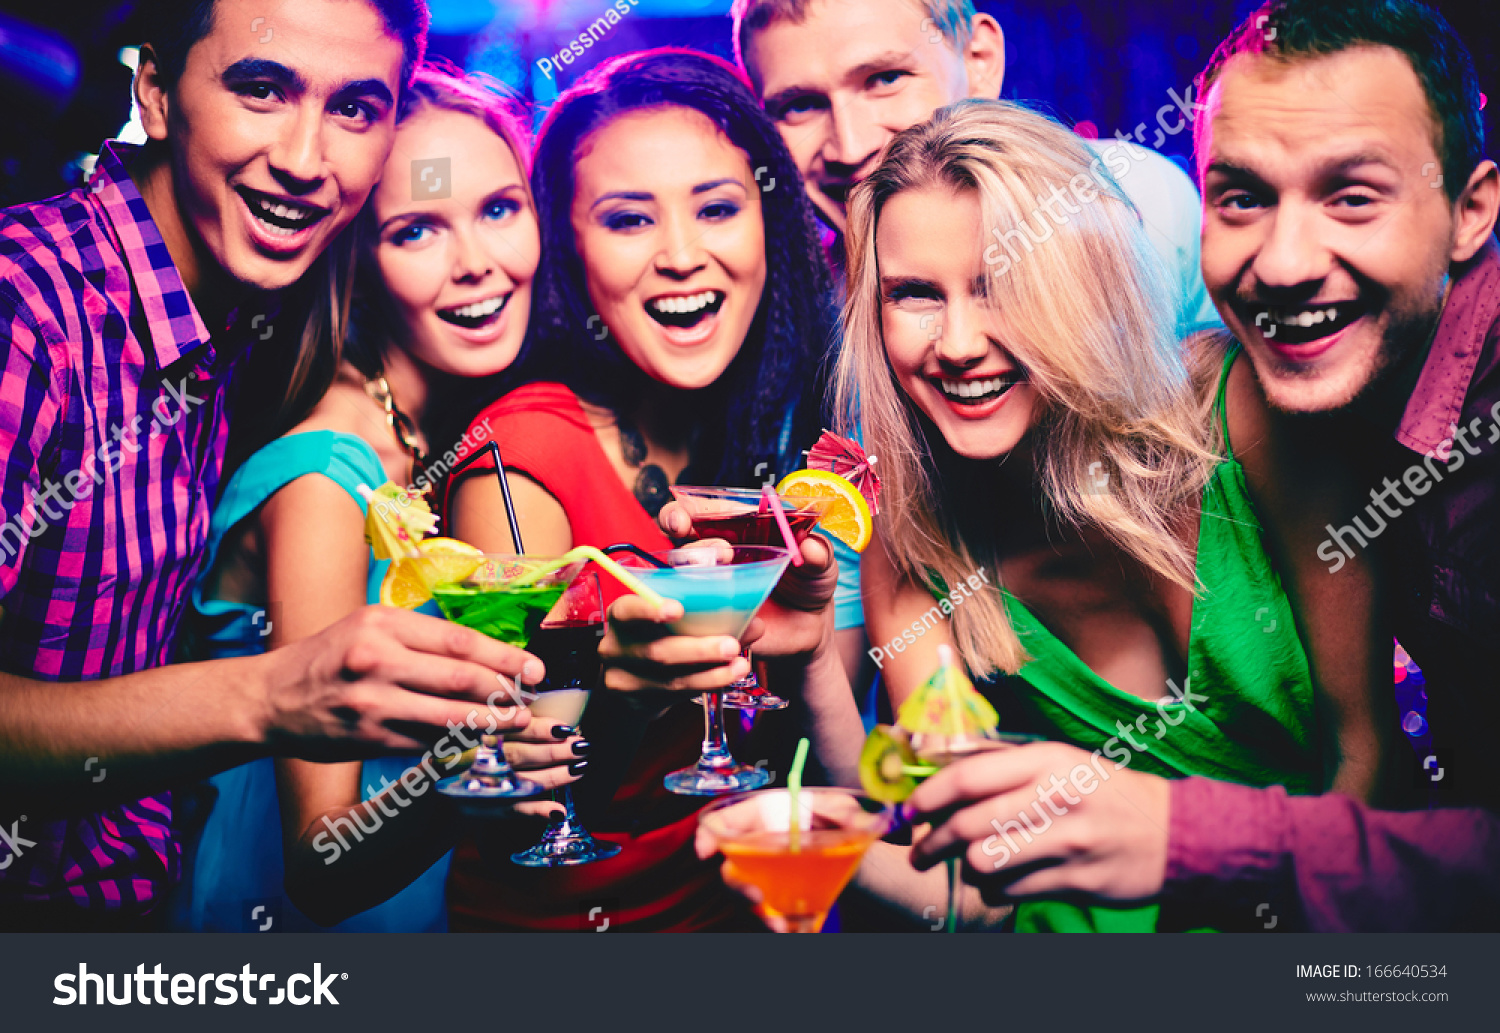 Group Happy Friends Cocktails Toasting Party Stock Photo 166640534 ...